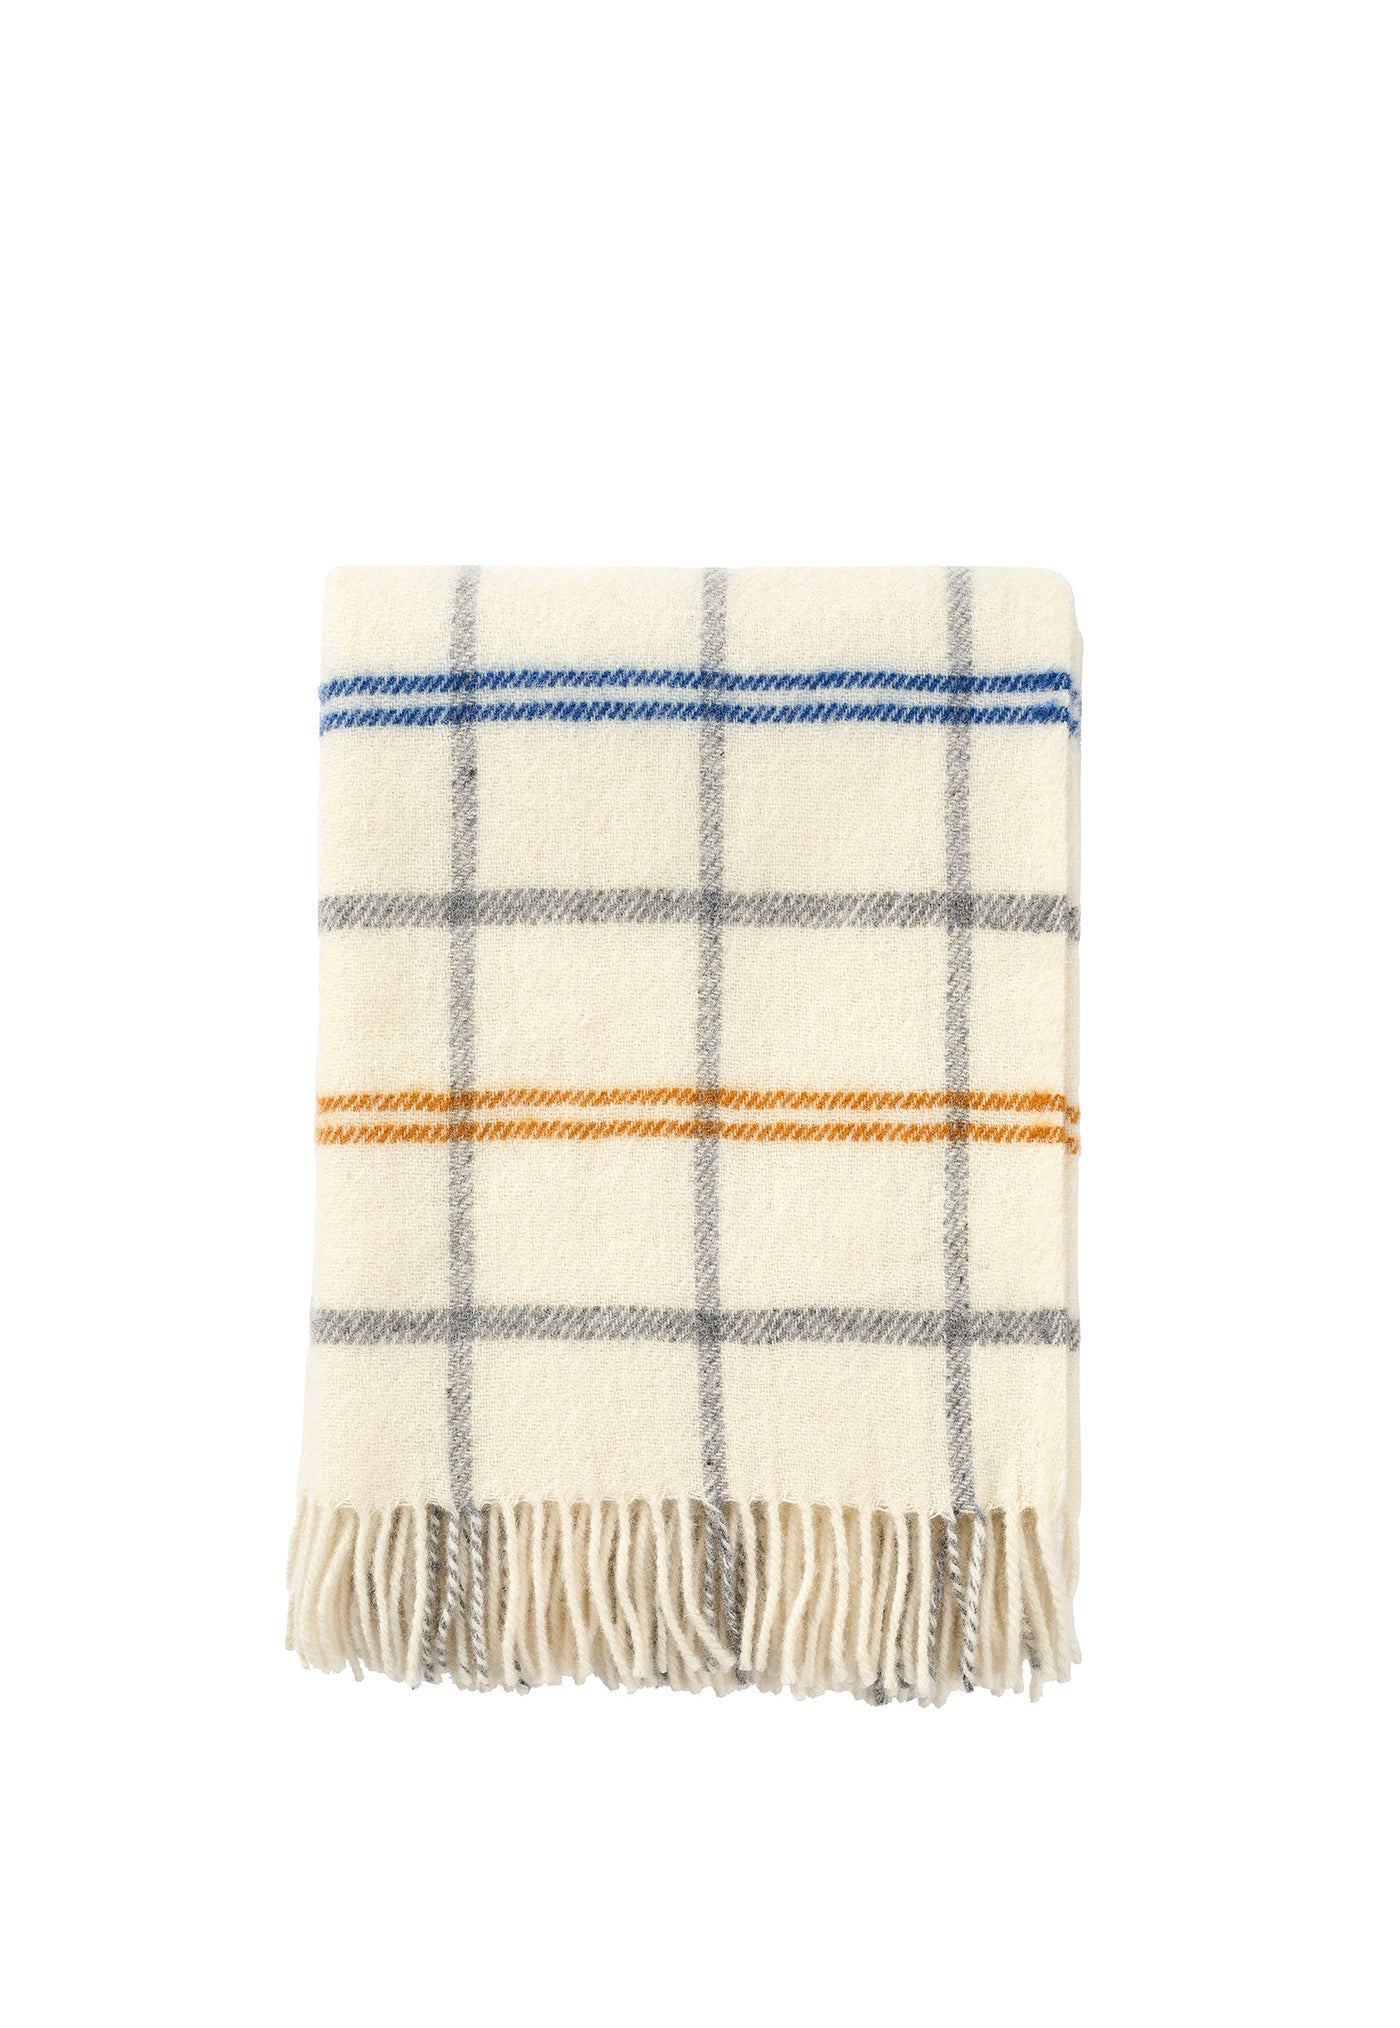 Tartan Lambswool Throw - White/Yellow/Blue sold by Angel Divine